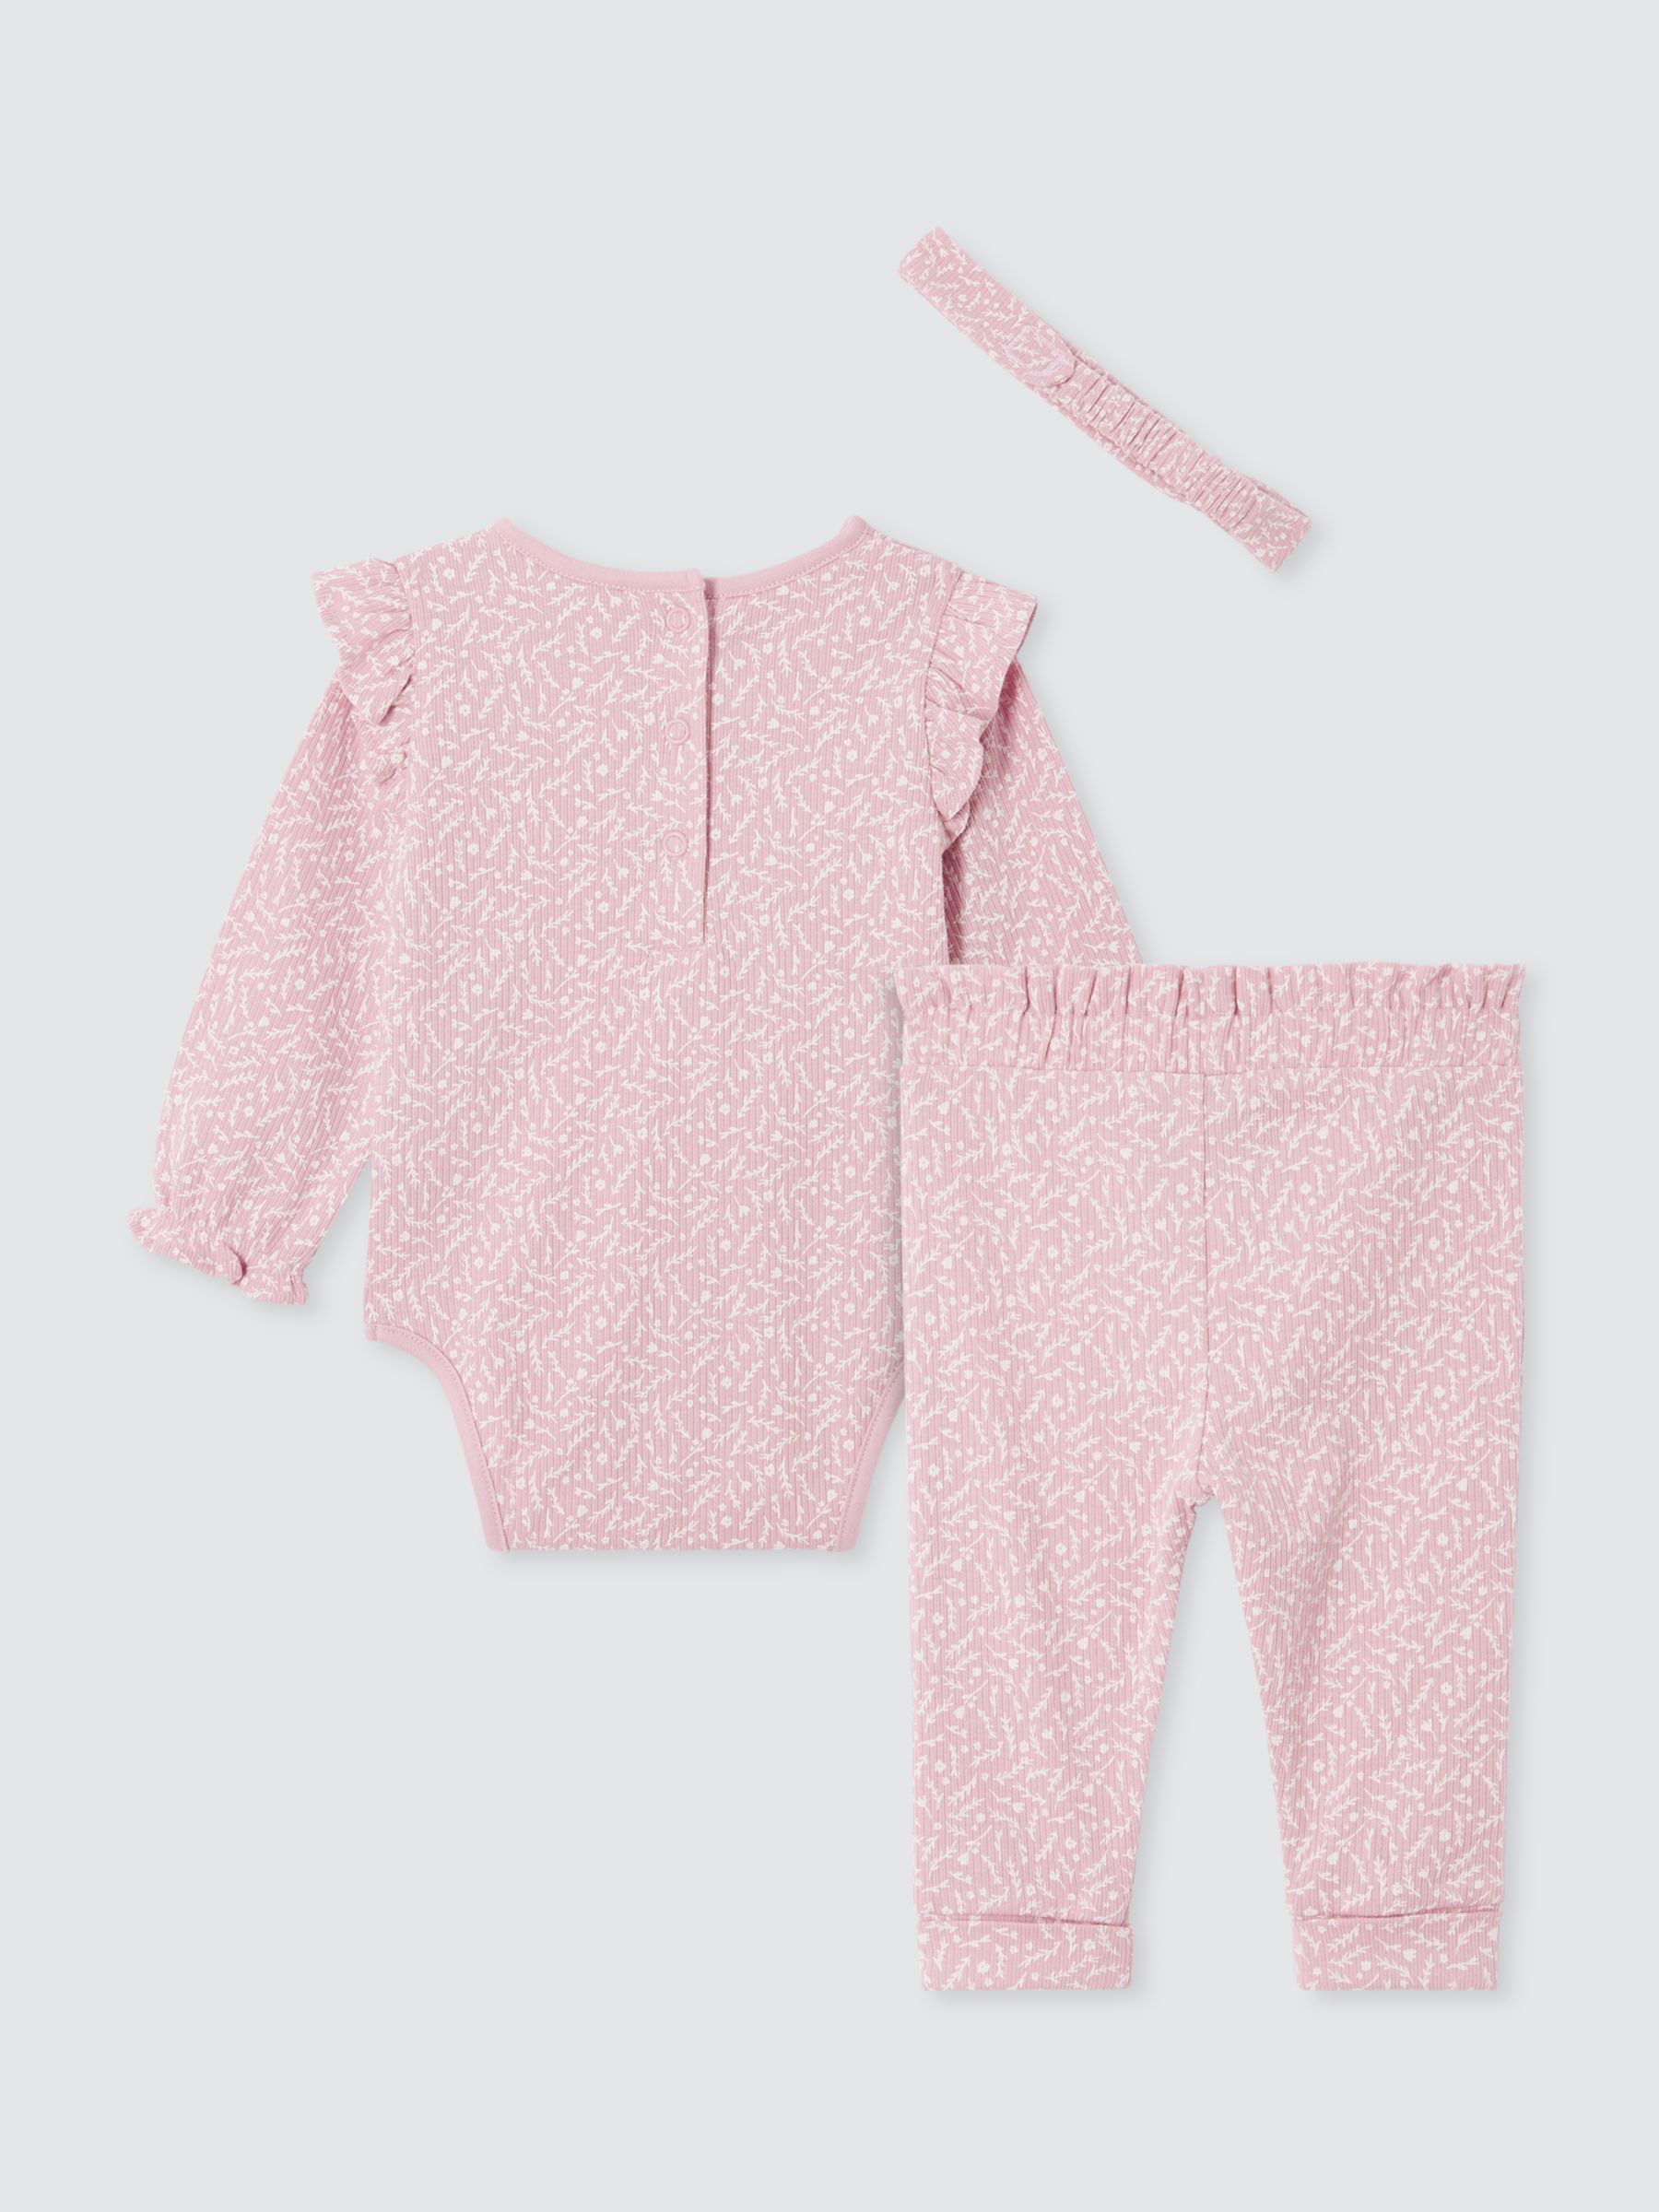 Buy John Lewis Baby Floral Bodysuit, Trousers and Headband Set, Pink Online at johnlewis.com